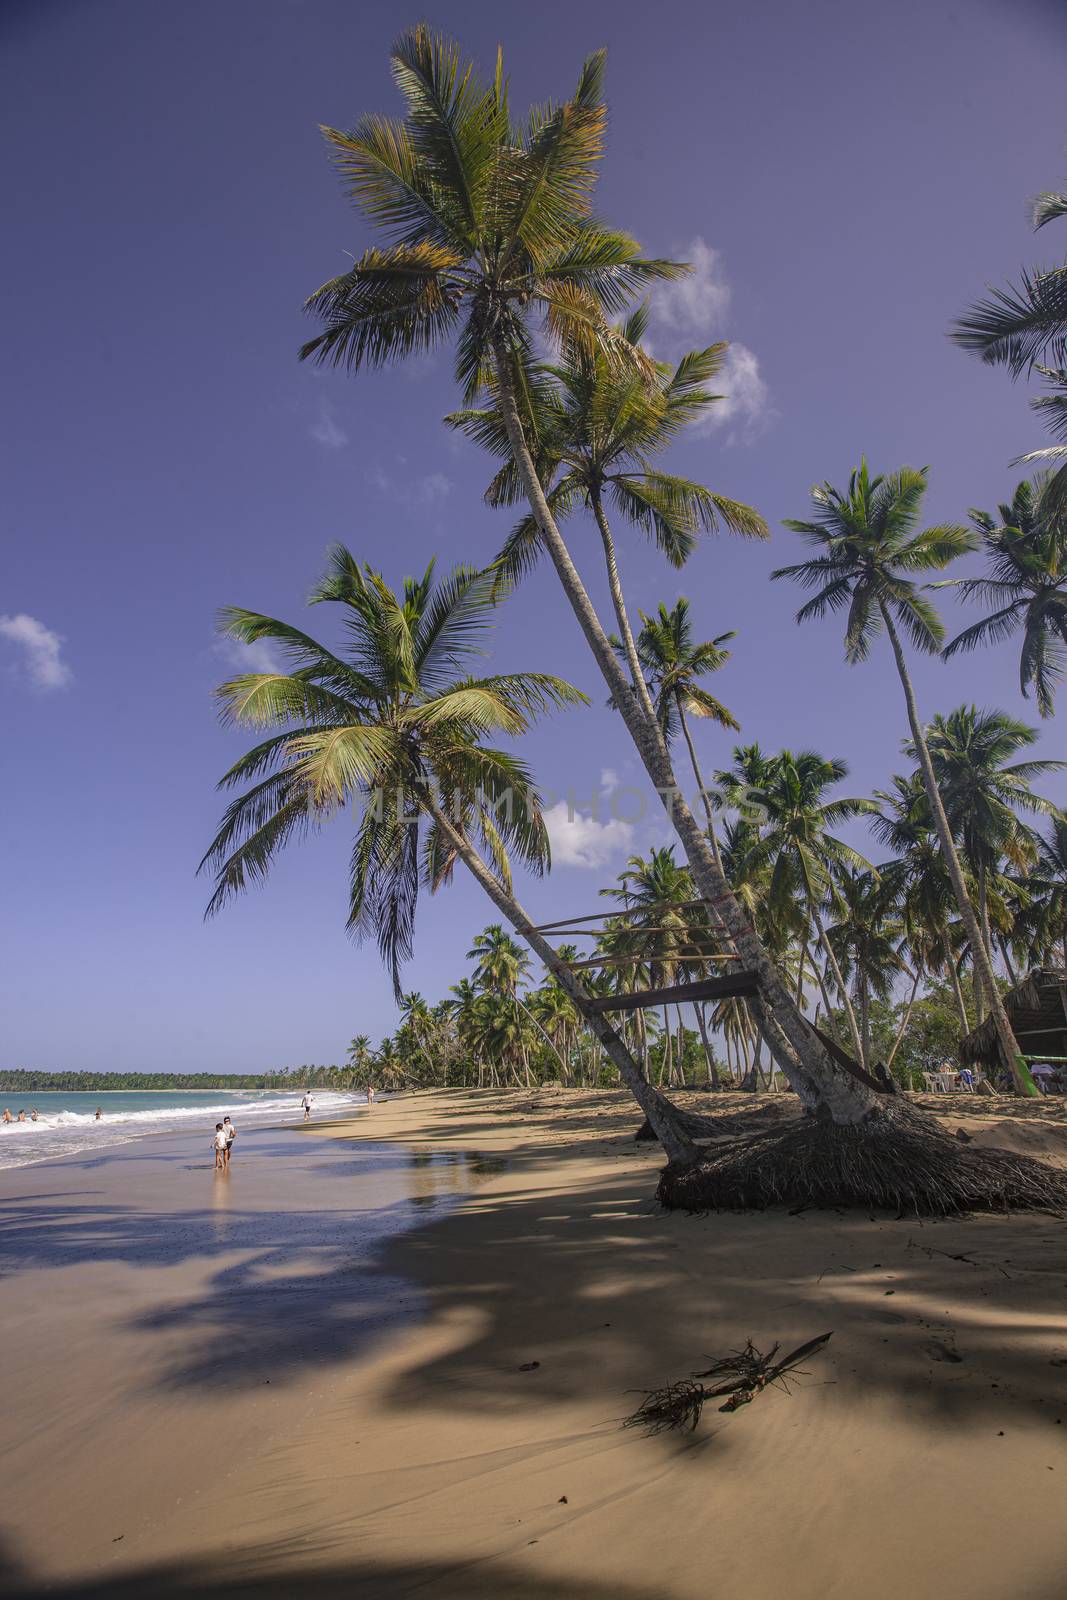 Panorama of the beautiful and natural beach of Playa Limon in the Dominican Republic